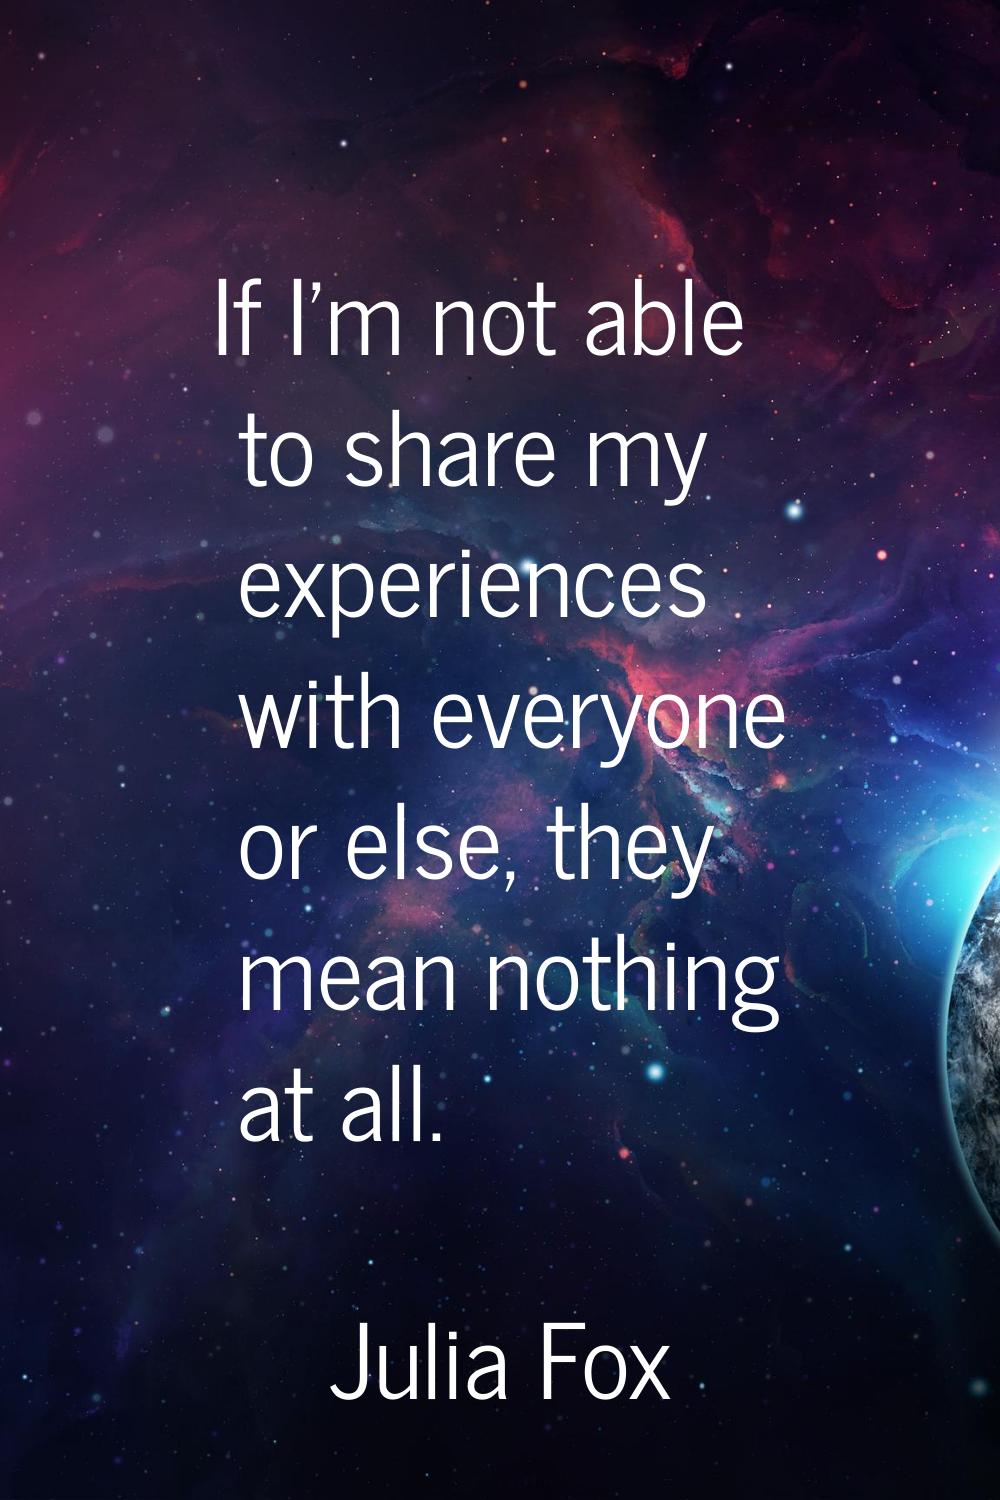 If I'm not able to share my experiences with everyone or else, they mean nothing at all.